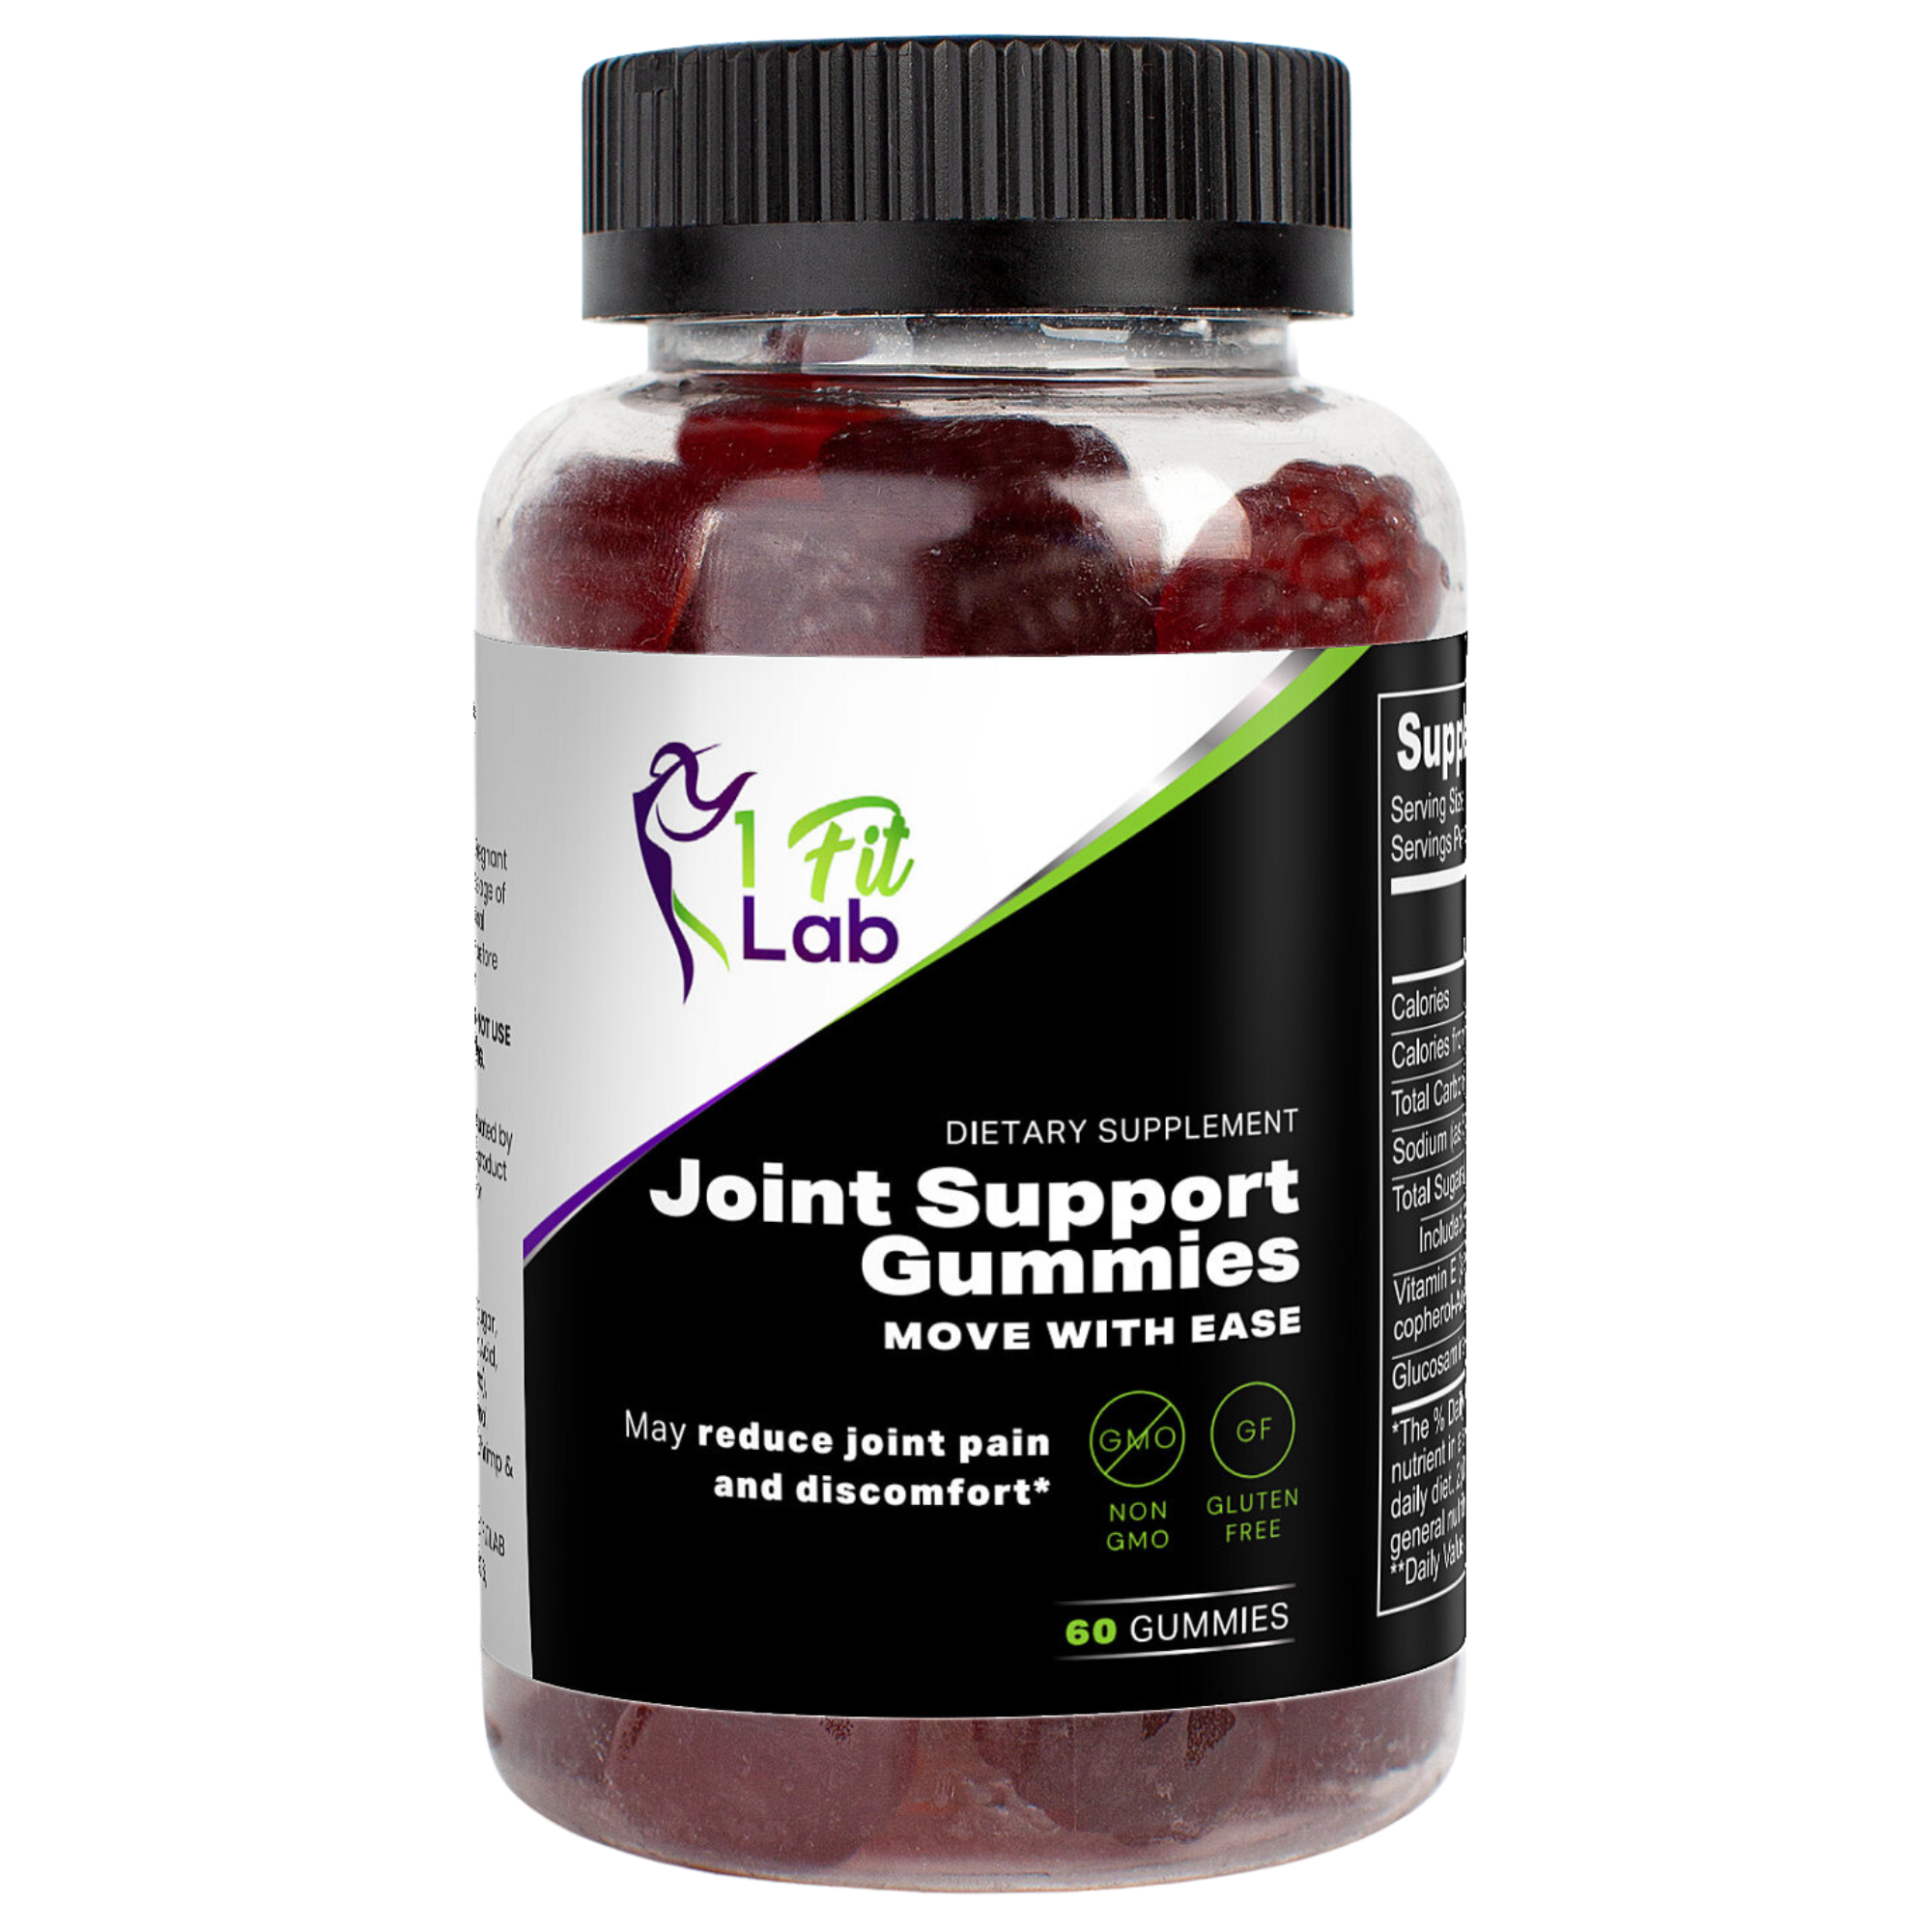 Bottle of Joint Support Gummies enriched with glucosamine and Vitamin E for joint health